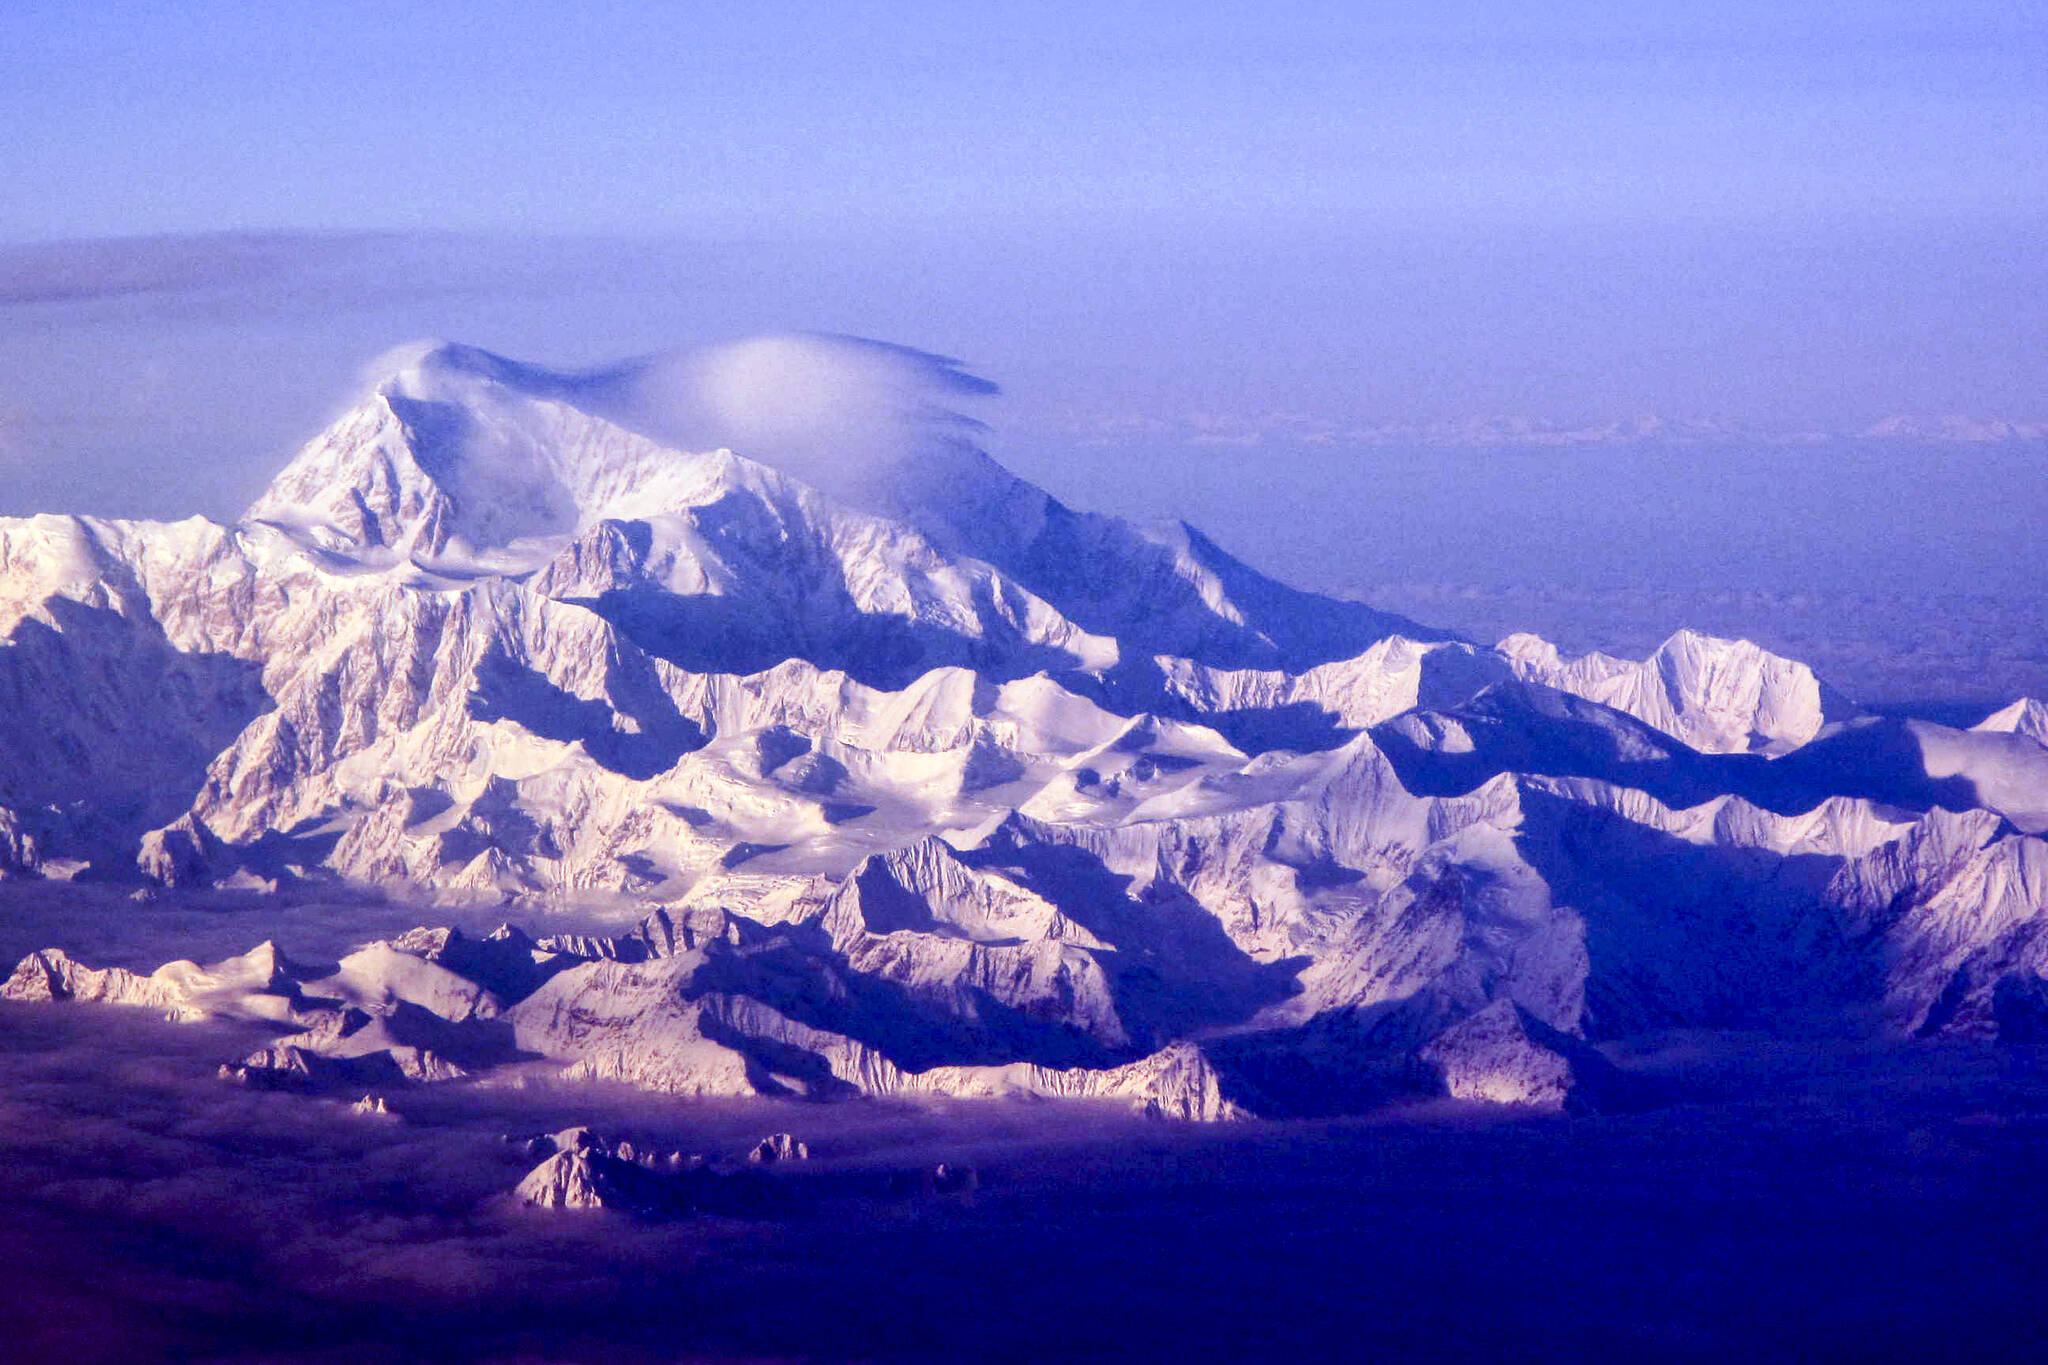 Denali stands at 20,310 feet as seen from a commercial flight between Anchorage and Fairbanks. (Photo by Ned Rozell)